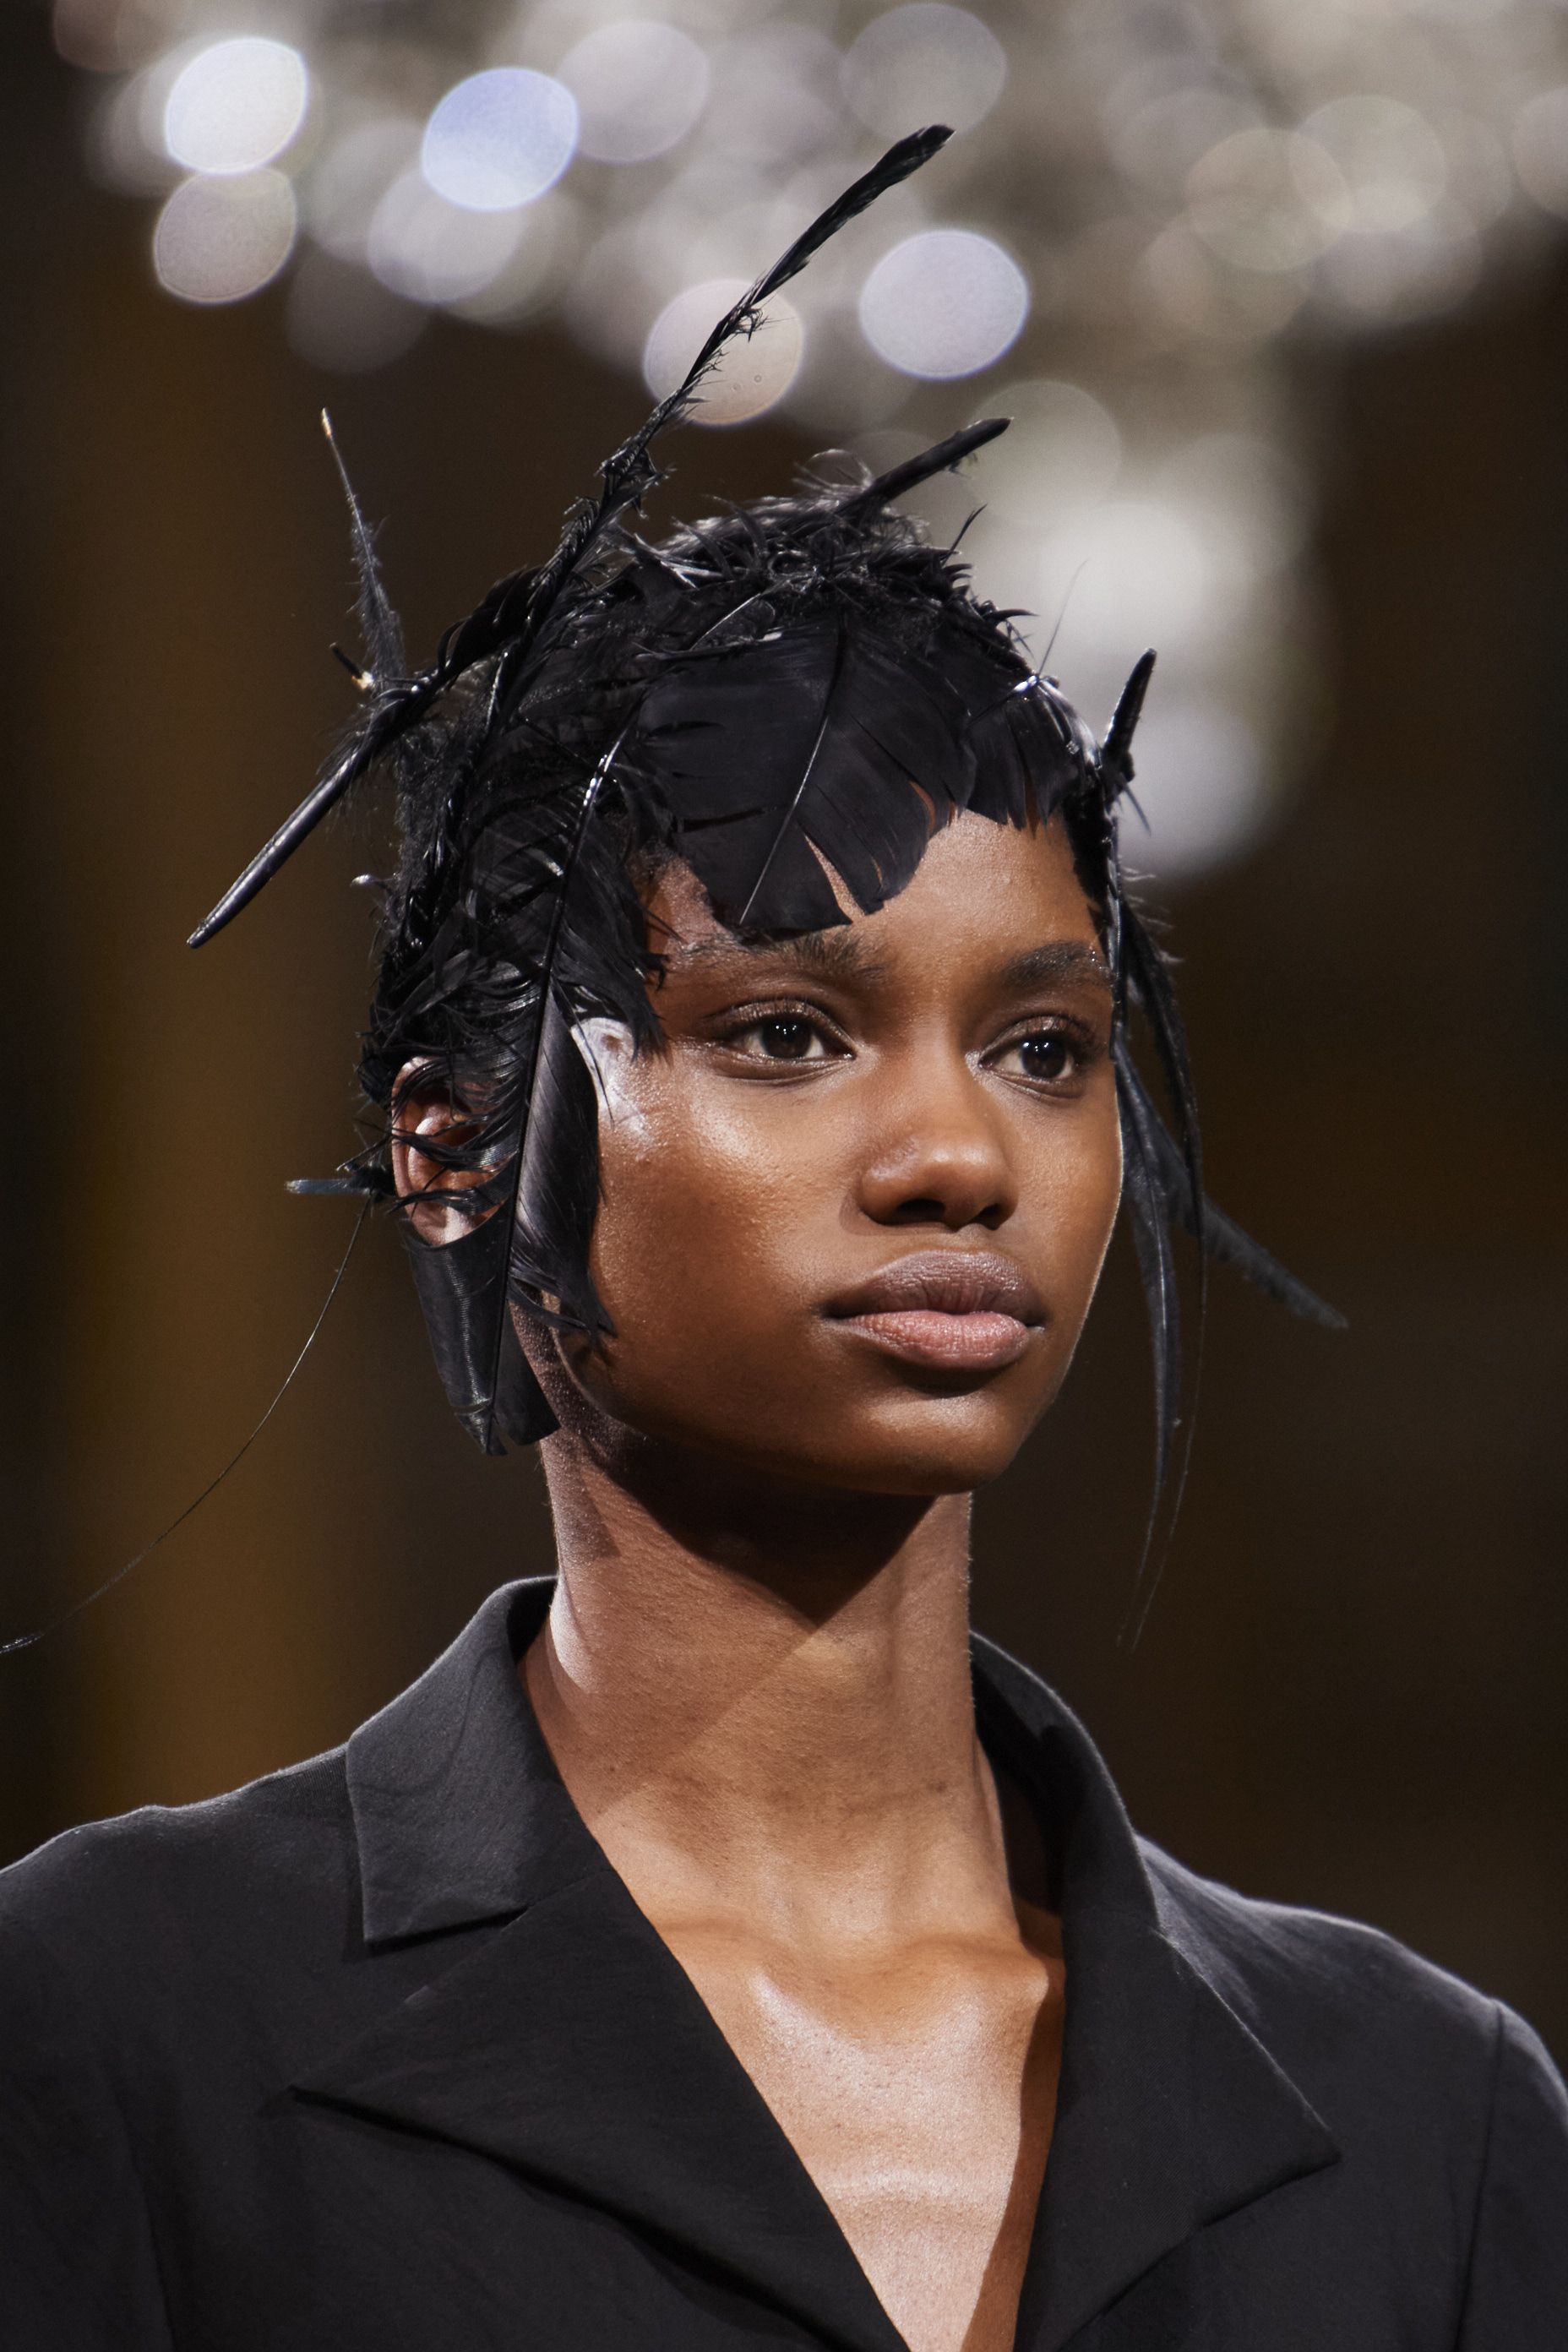 6 next season hair trends spotted at Berlin Fashion Week SS19